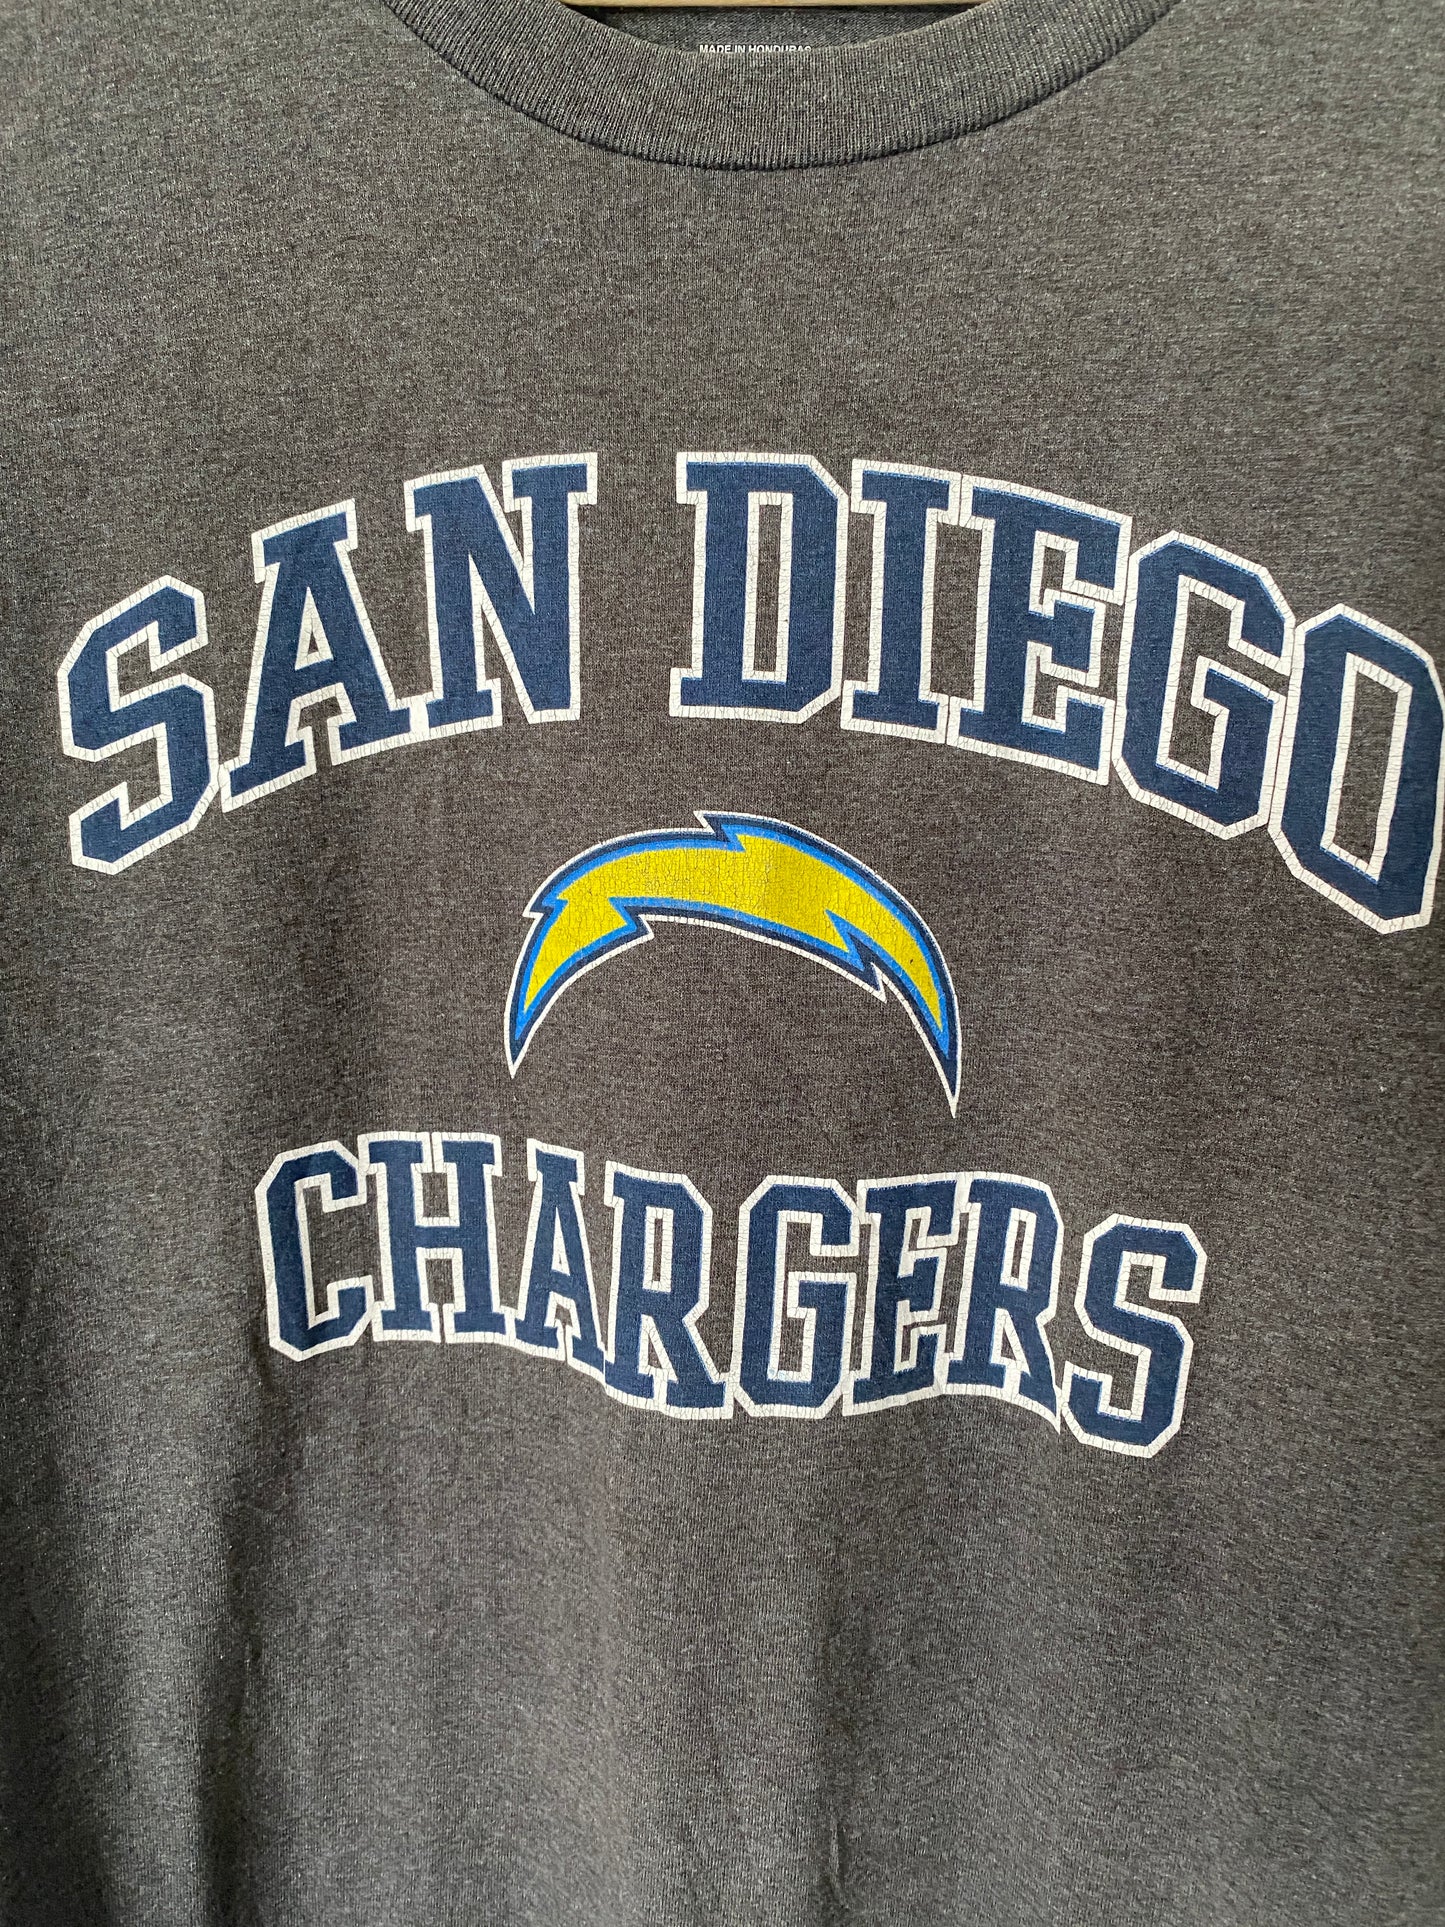 San Diego Chargers Football T-Shirt - L